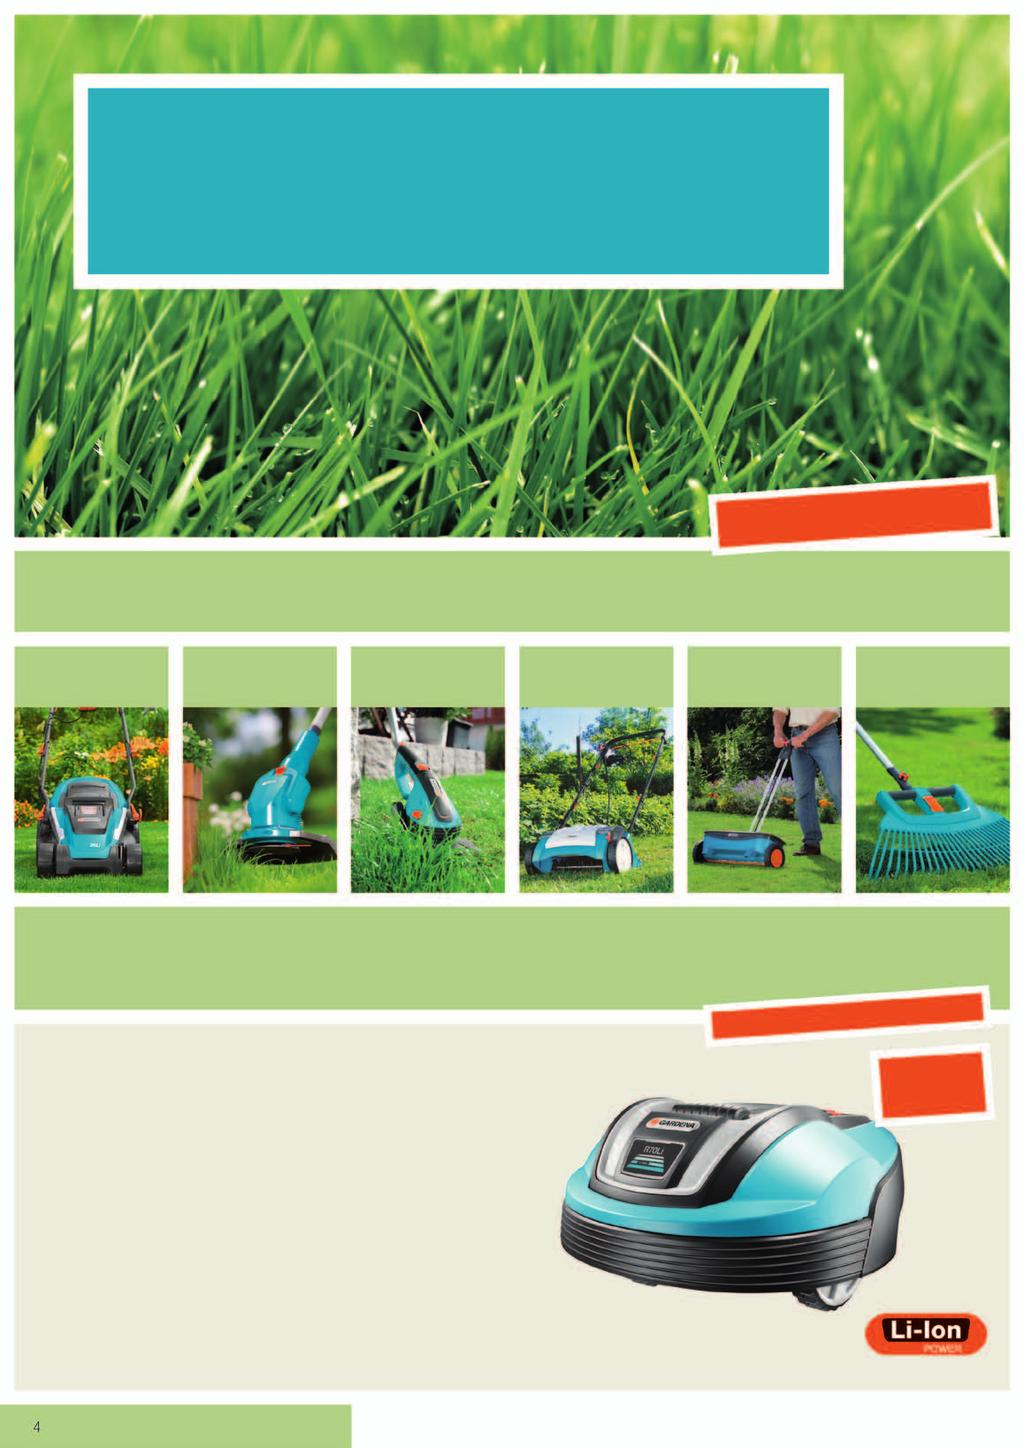 GARDENA Lawn care So that your lawn will be even more beautiful.